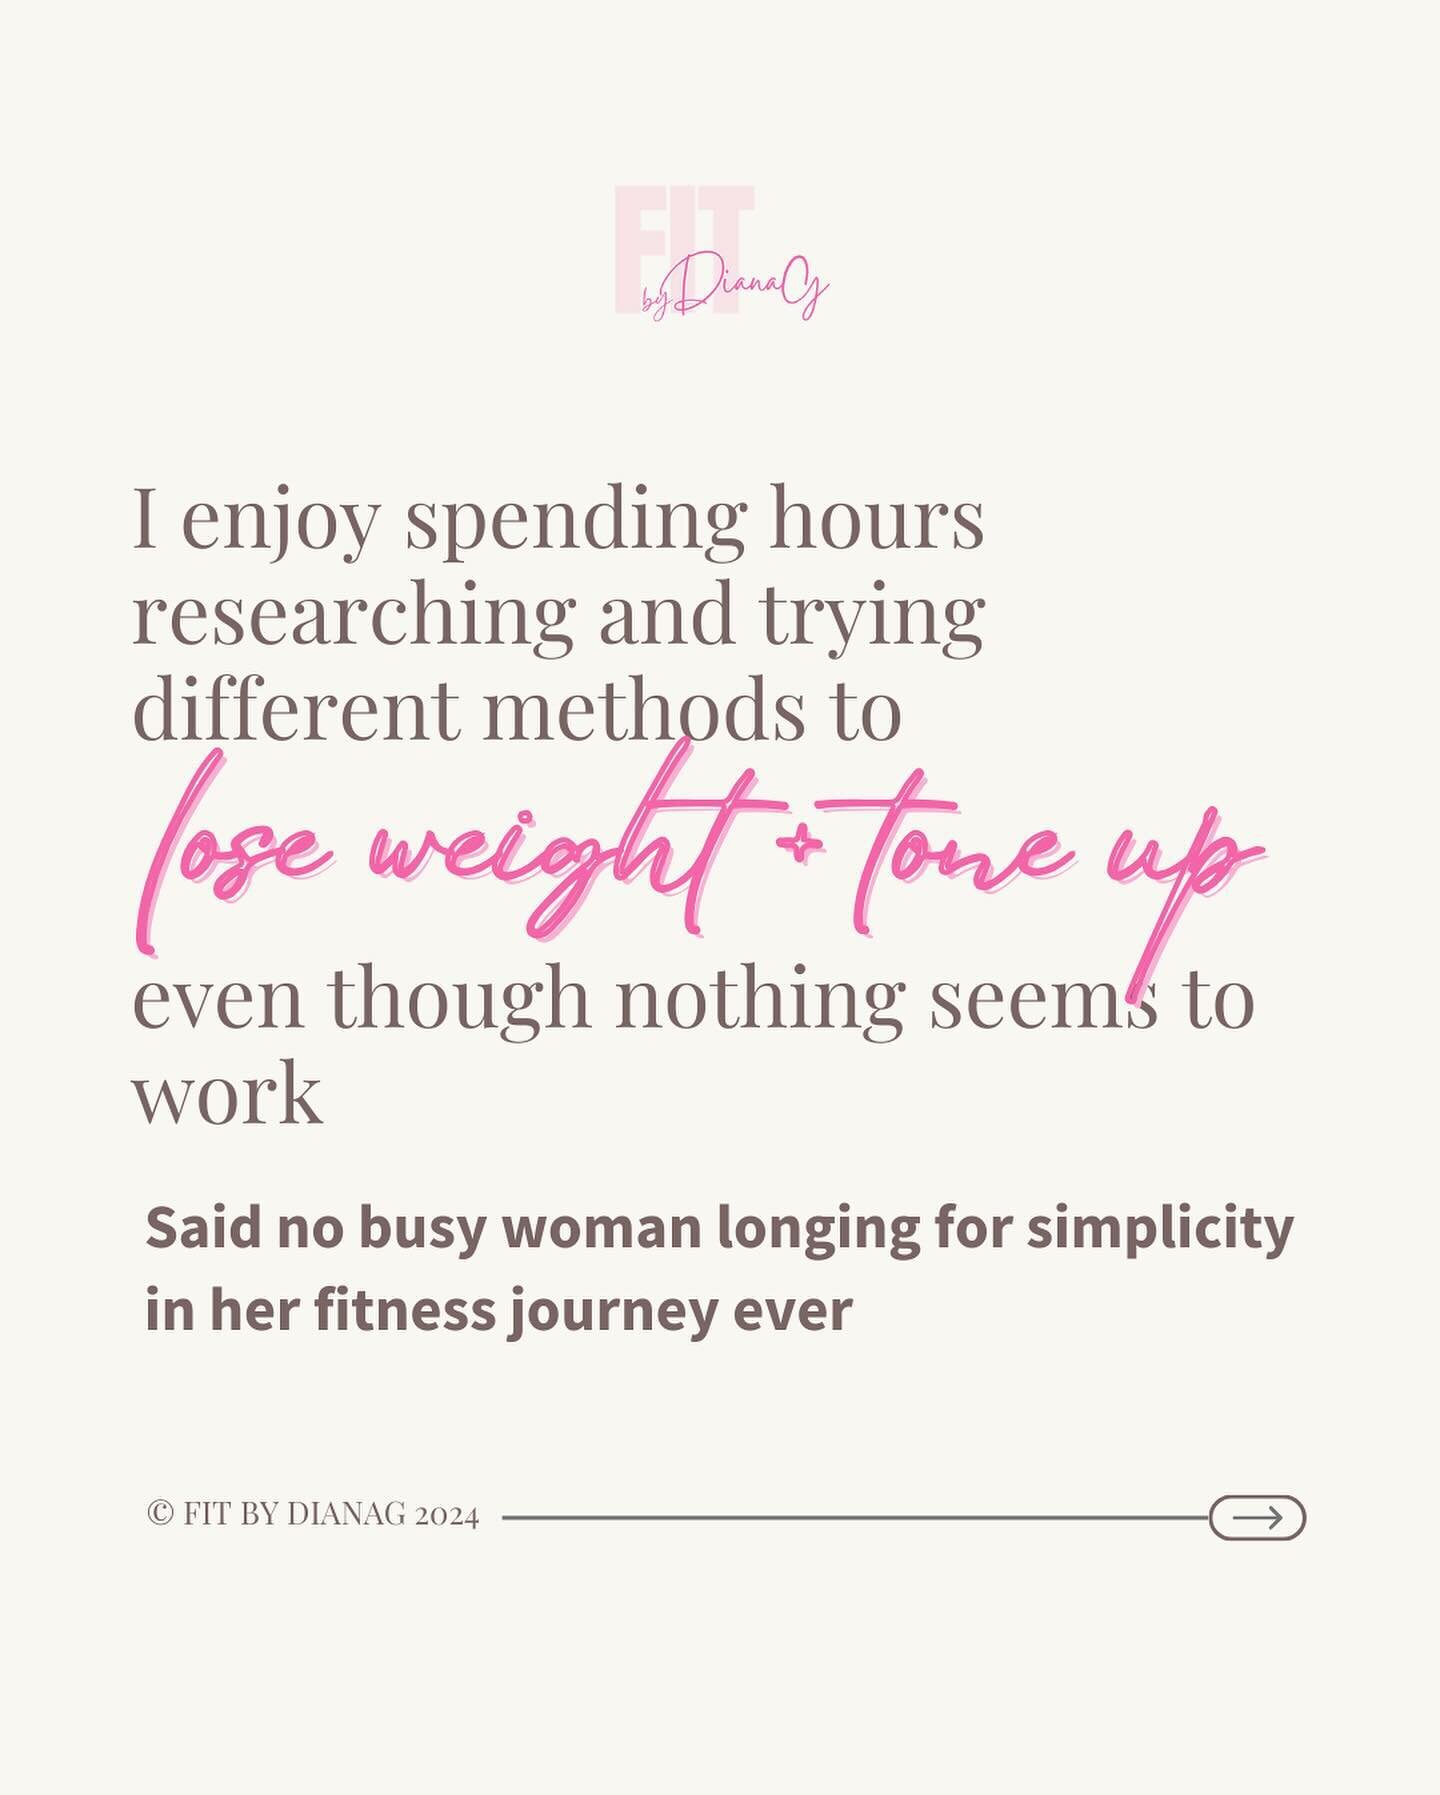 Ever heard a busy woman longing for simplicity in her fitness journey say this before? 
Me neither! 

When you have the tools to help you streamline your fitness routine, you don&rsquo;t need to spend hours researching and trying different methods, a